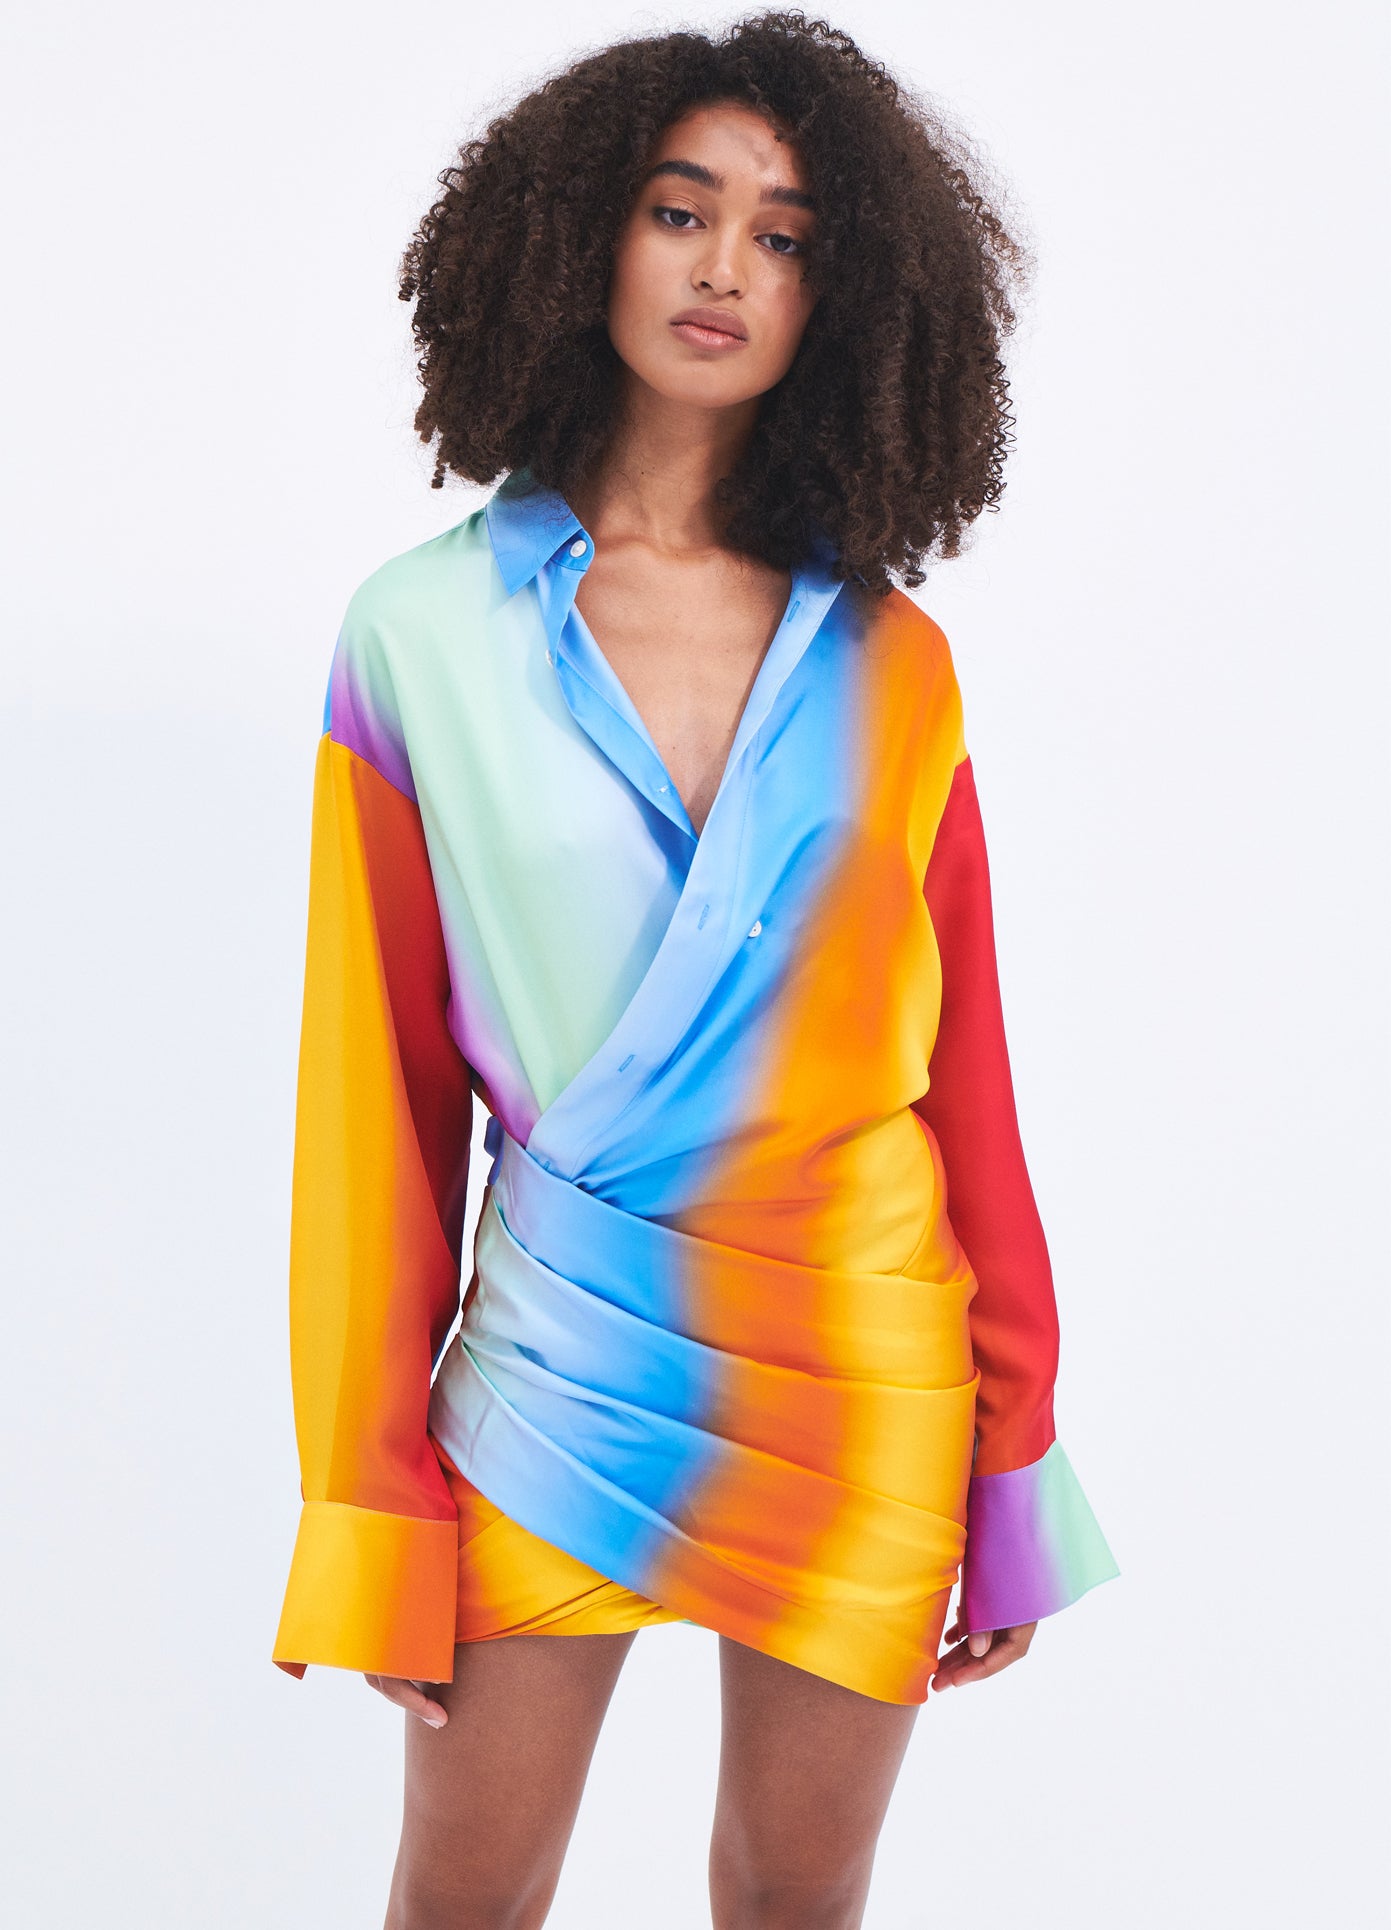 MONSE Rainbow Blur Wrapped Shirt Dress in Multi Colors on model front view